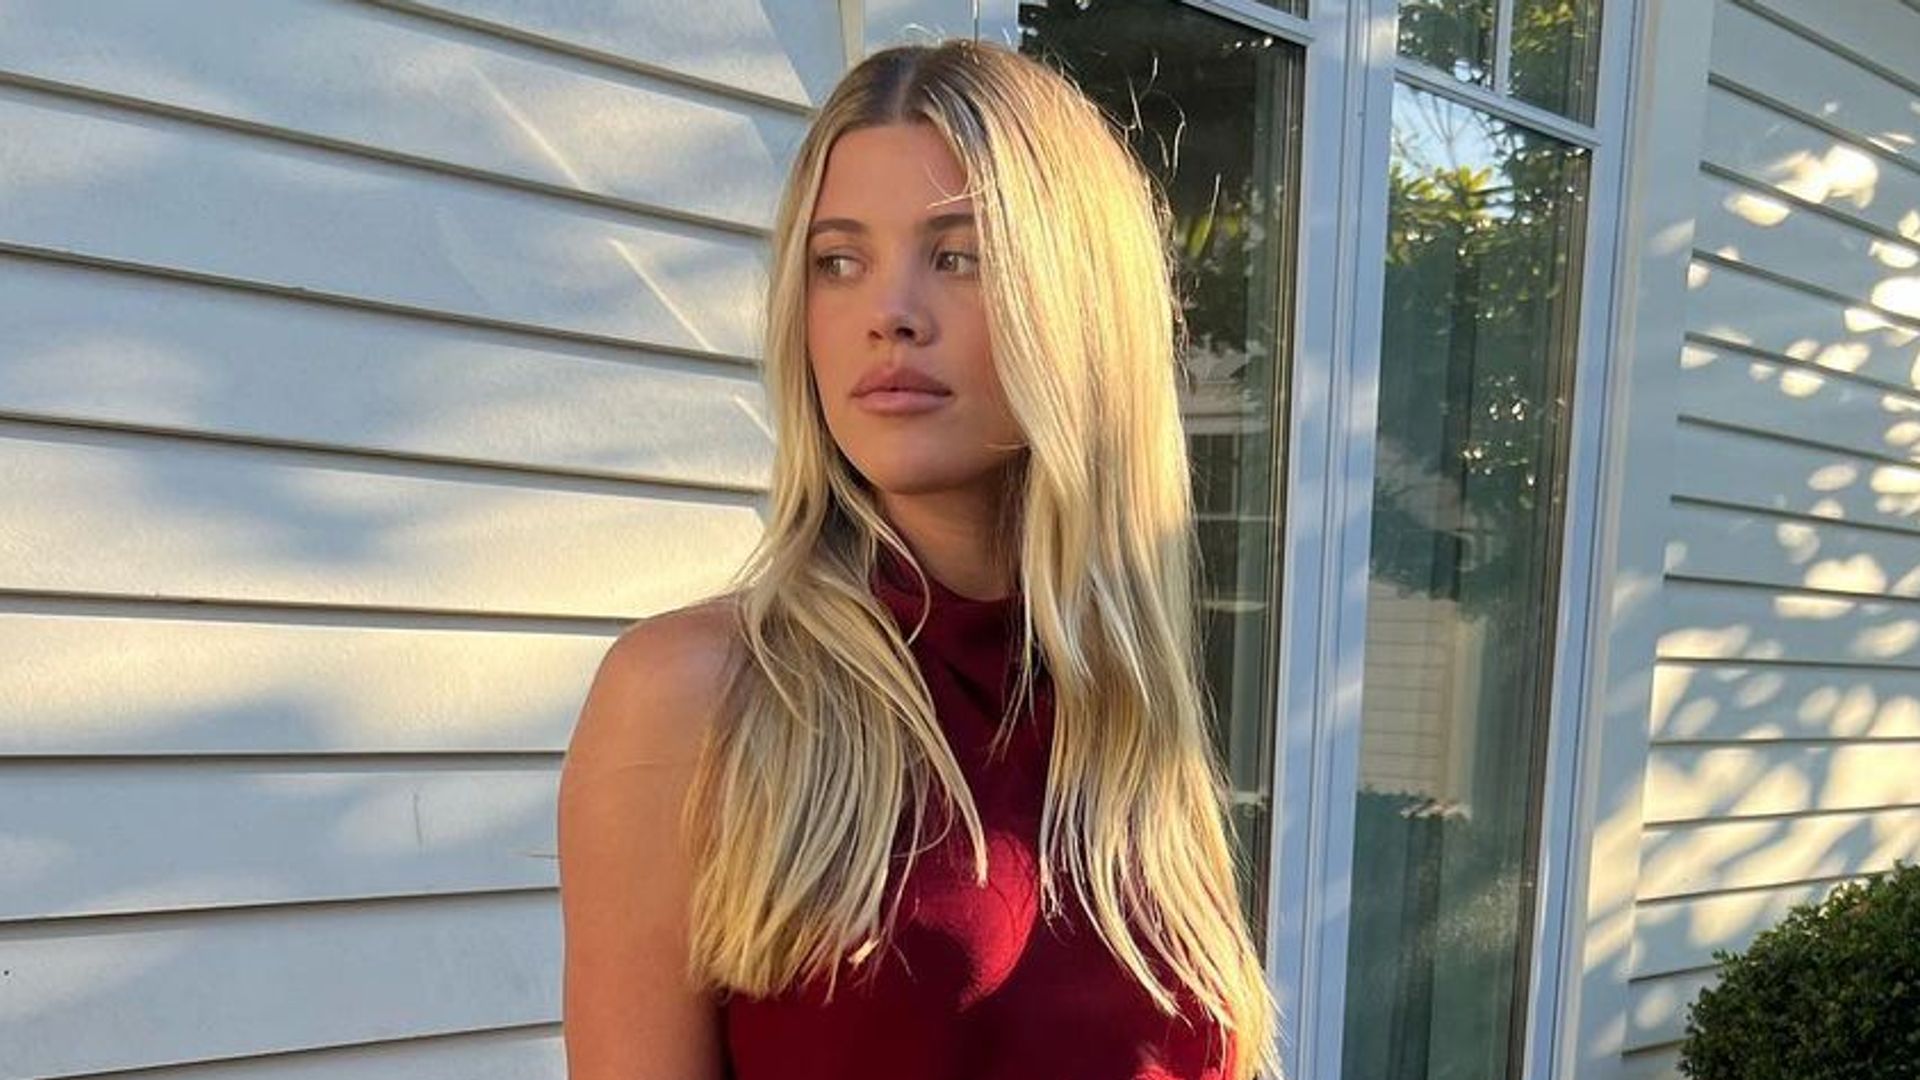 Sofia Richie in a red top looking away